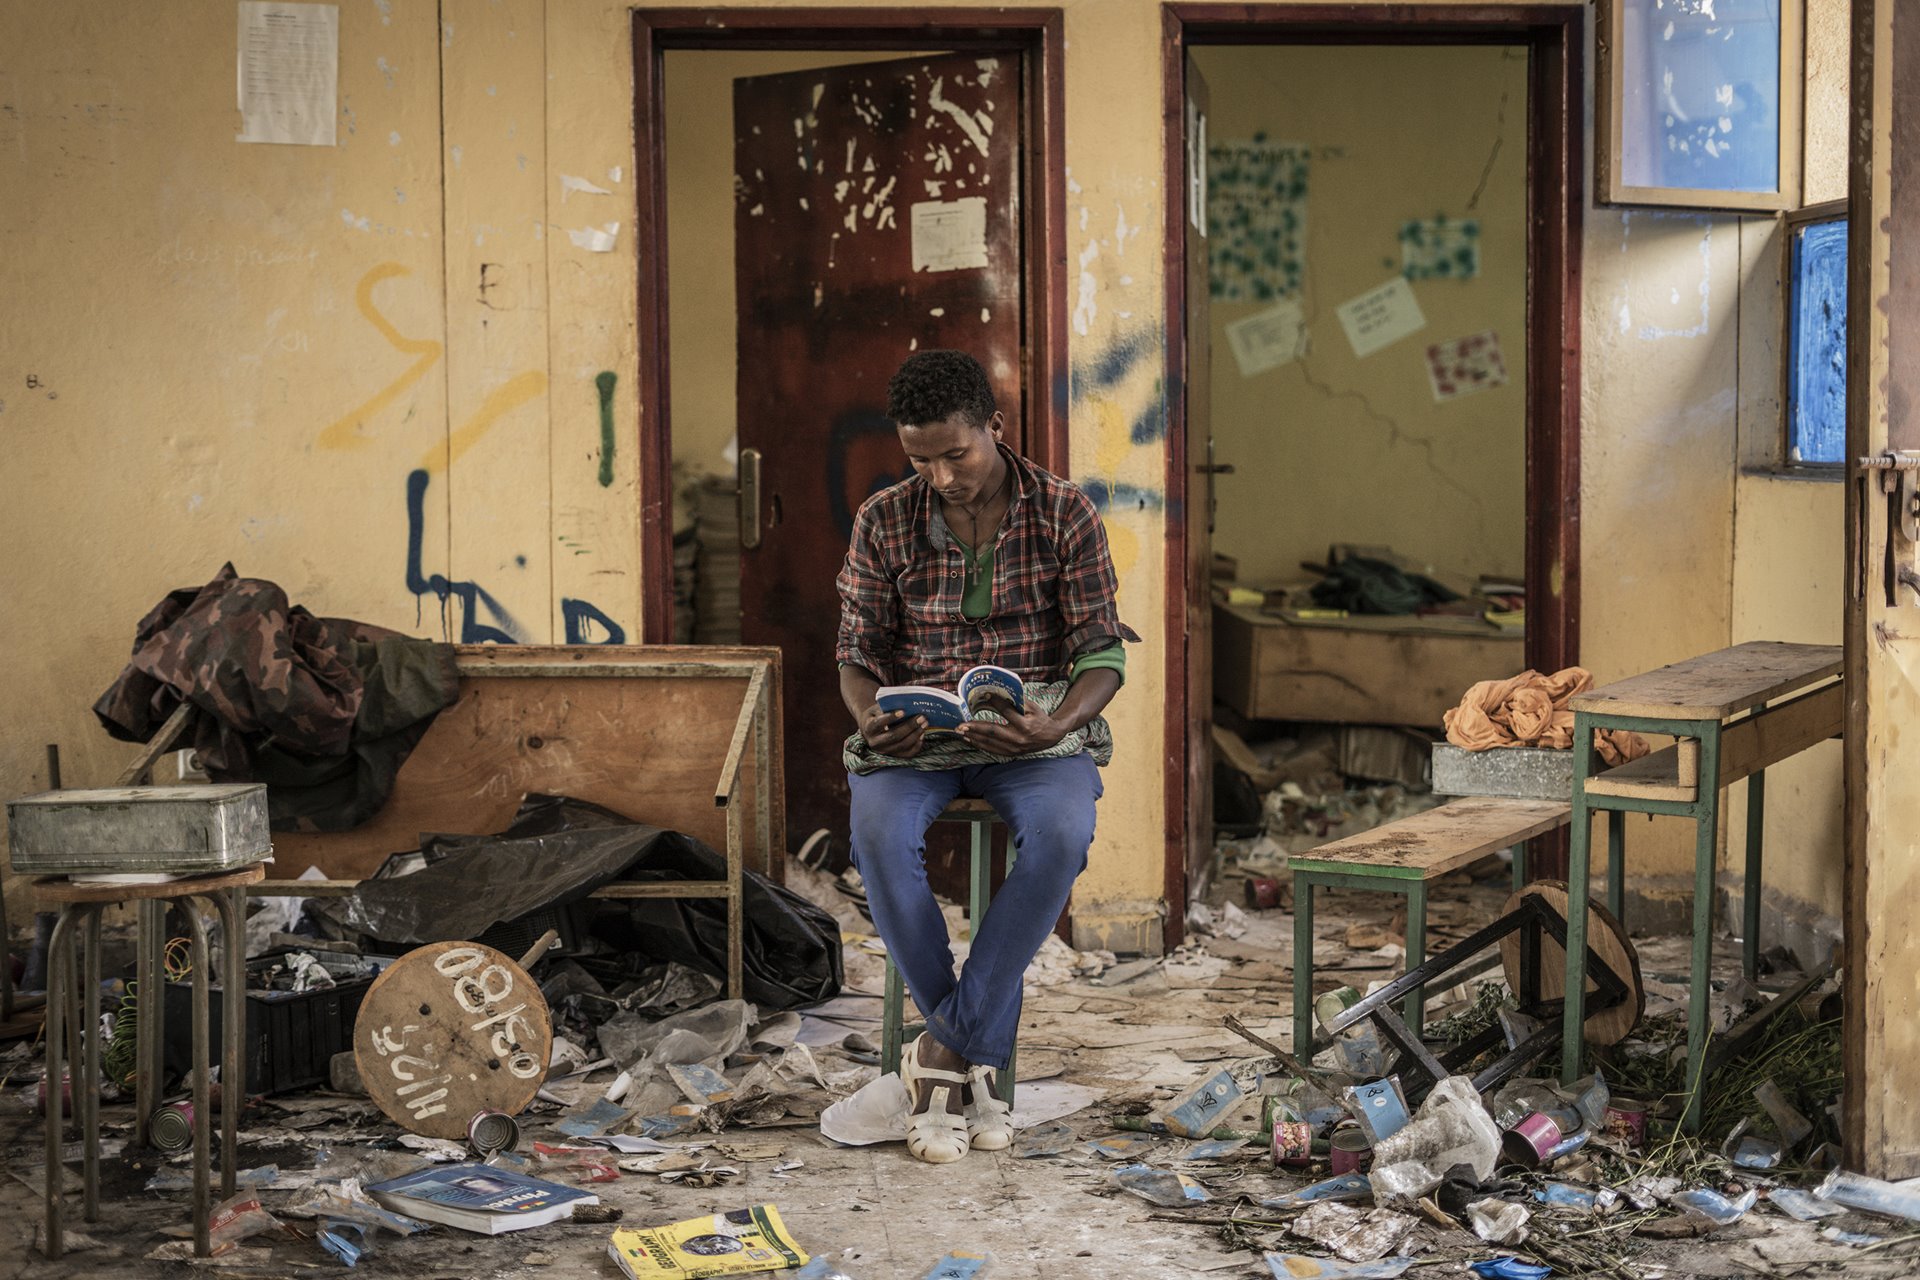 Kindu Fenta reads a book inside a classroom allegedly looted by pro-Tigray fighters, in Zarima, 140 kilometers from Gondar, Amhara, Ethiopia. Zarima is reported to have been the stage for a battle between Ethiopian and pro-Tigray forces.